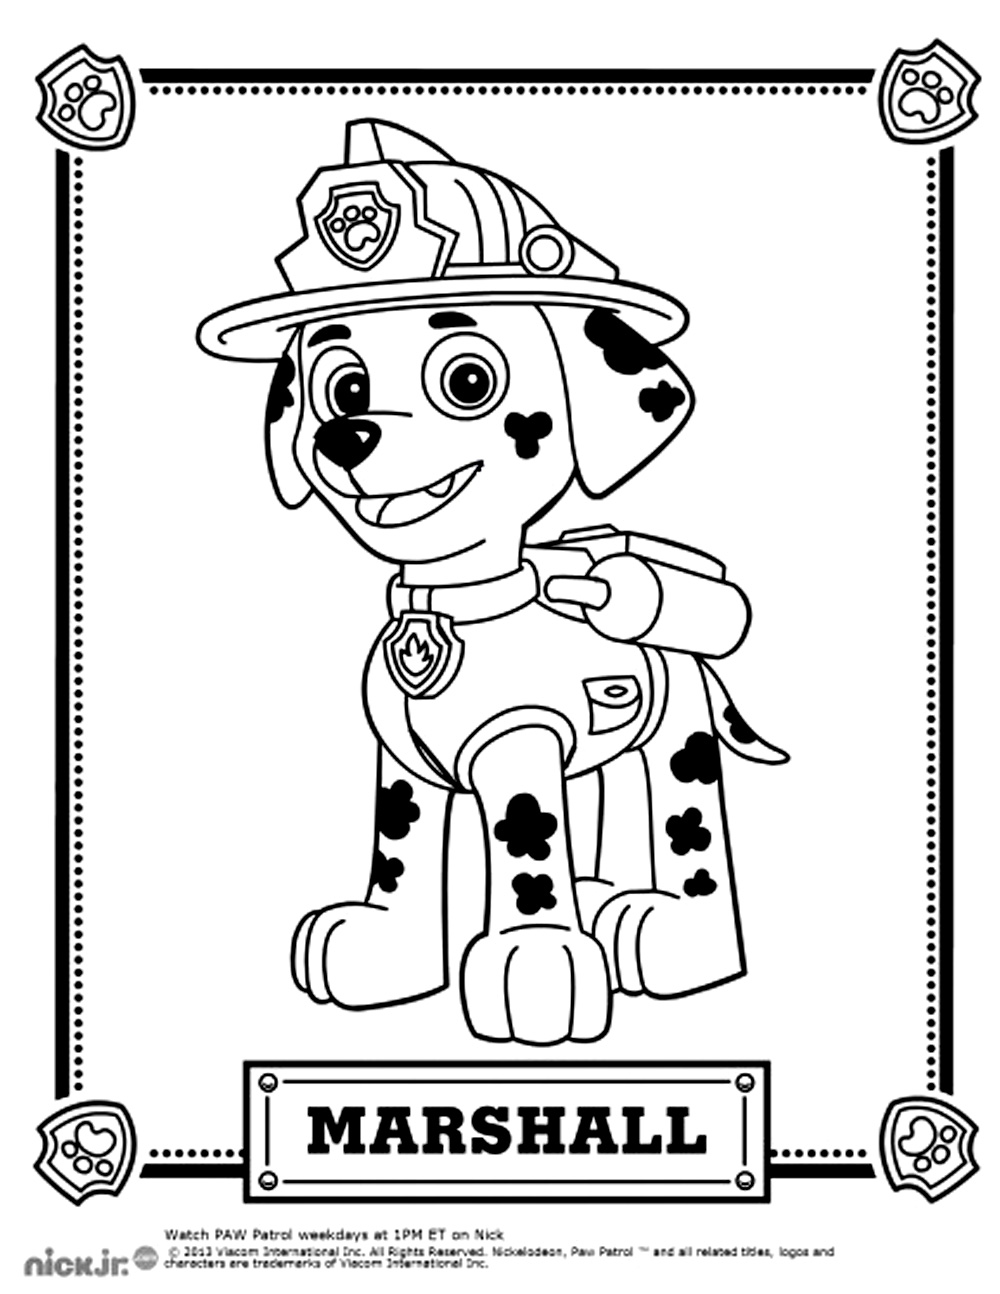 Free Patrol drawing to download and color - Paw Patrol Kids Coloring Pages